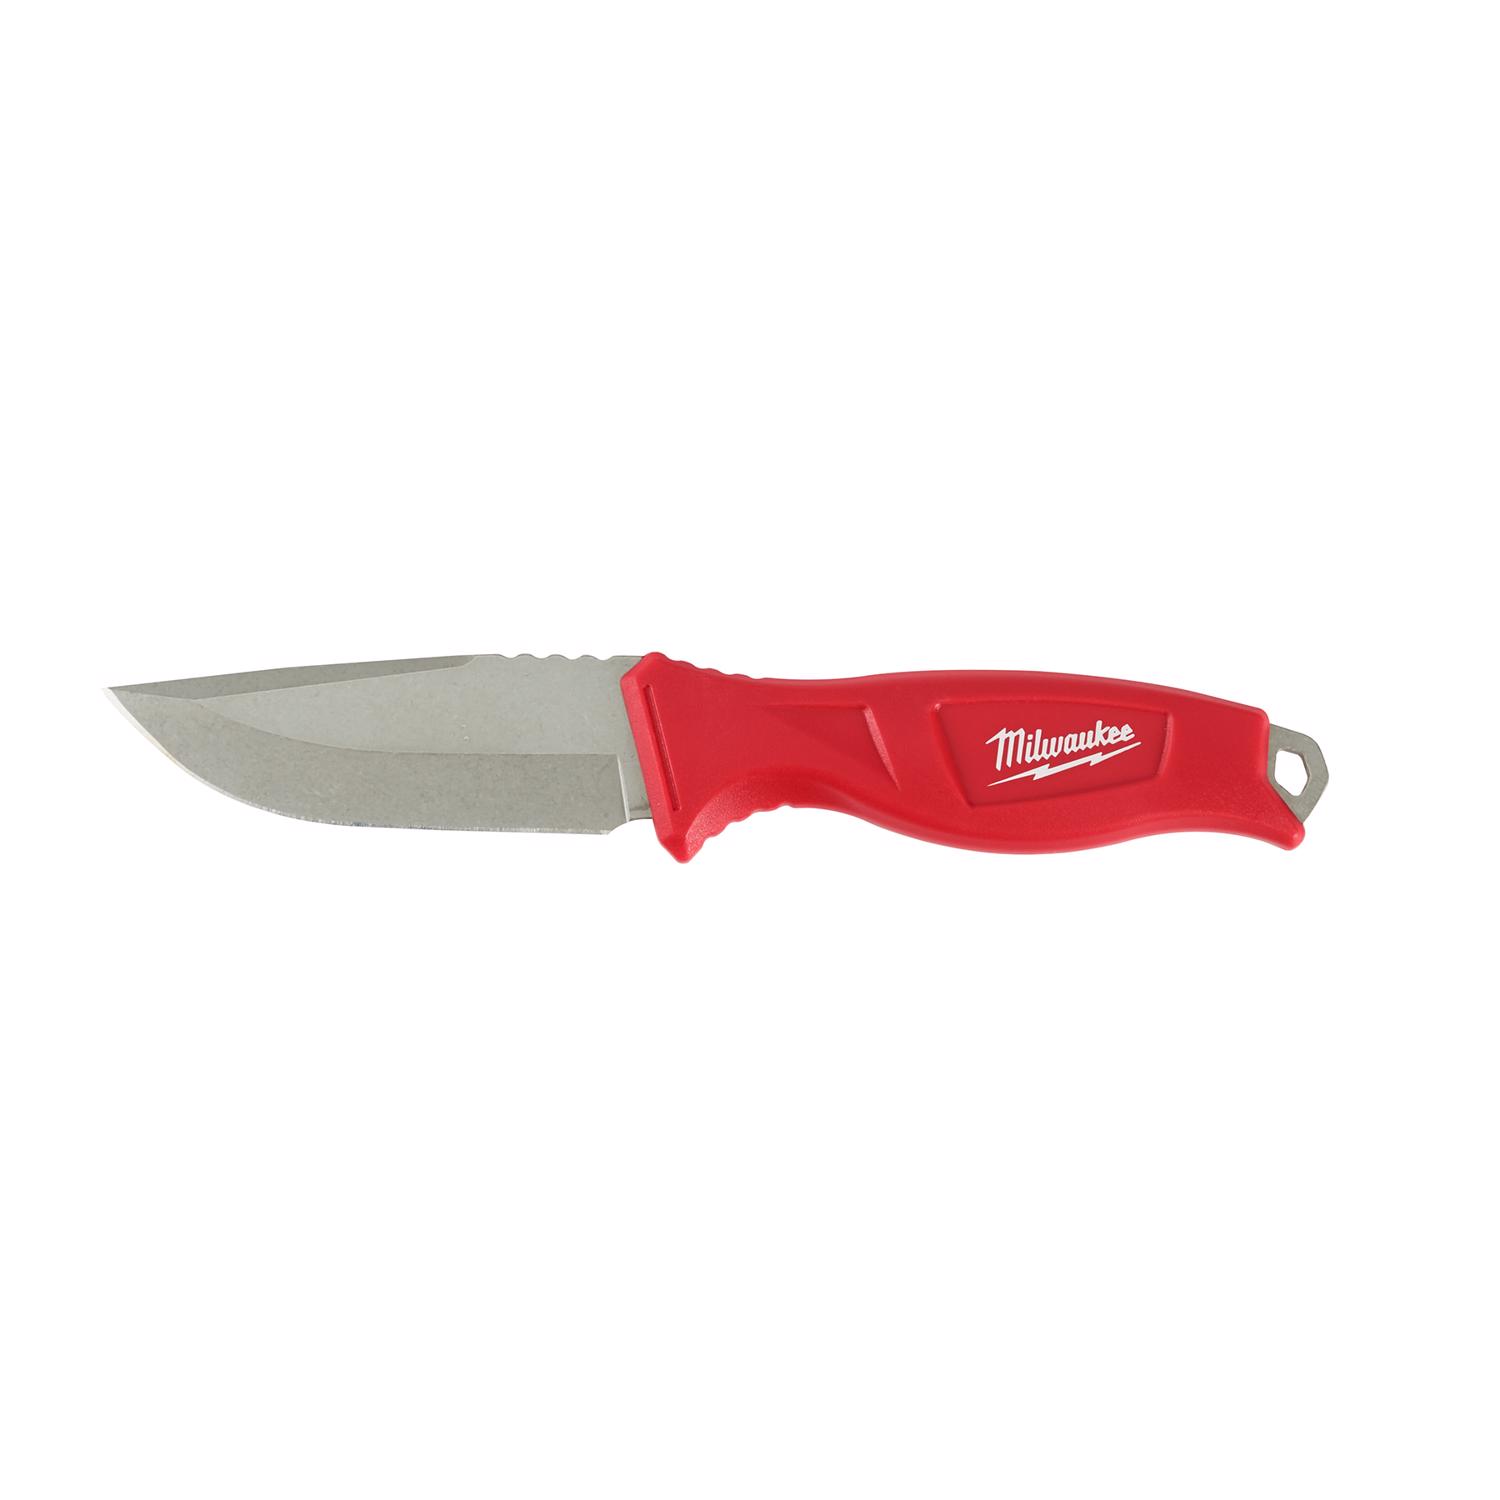 Photos - Utility Knife Milwaukee 9-1/2 in. Fixed Blade Knife Red 1 pc 48-22-1926 